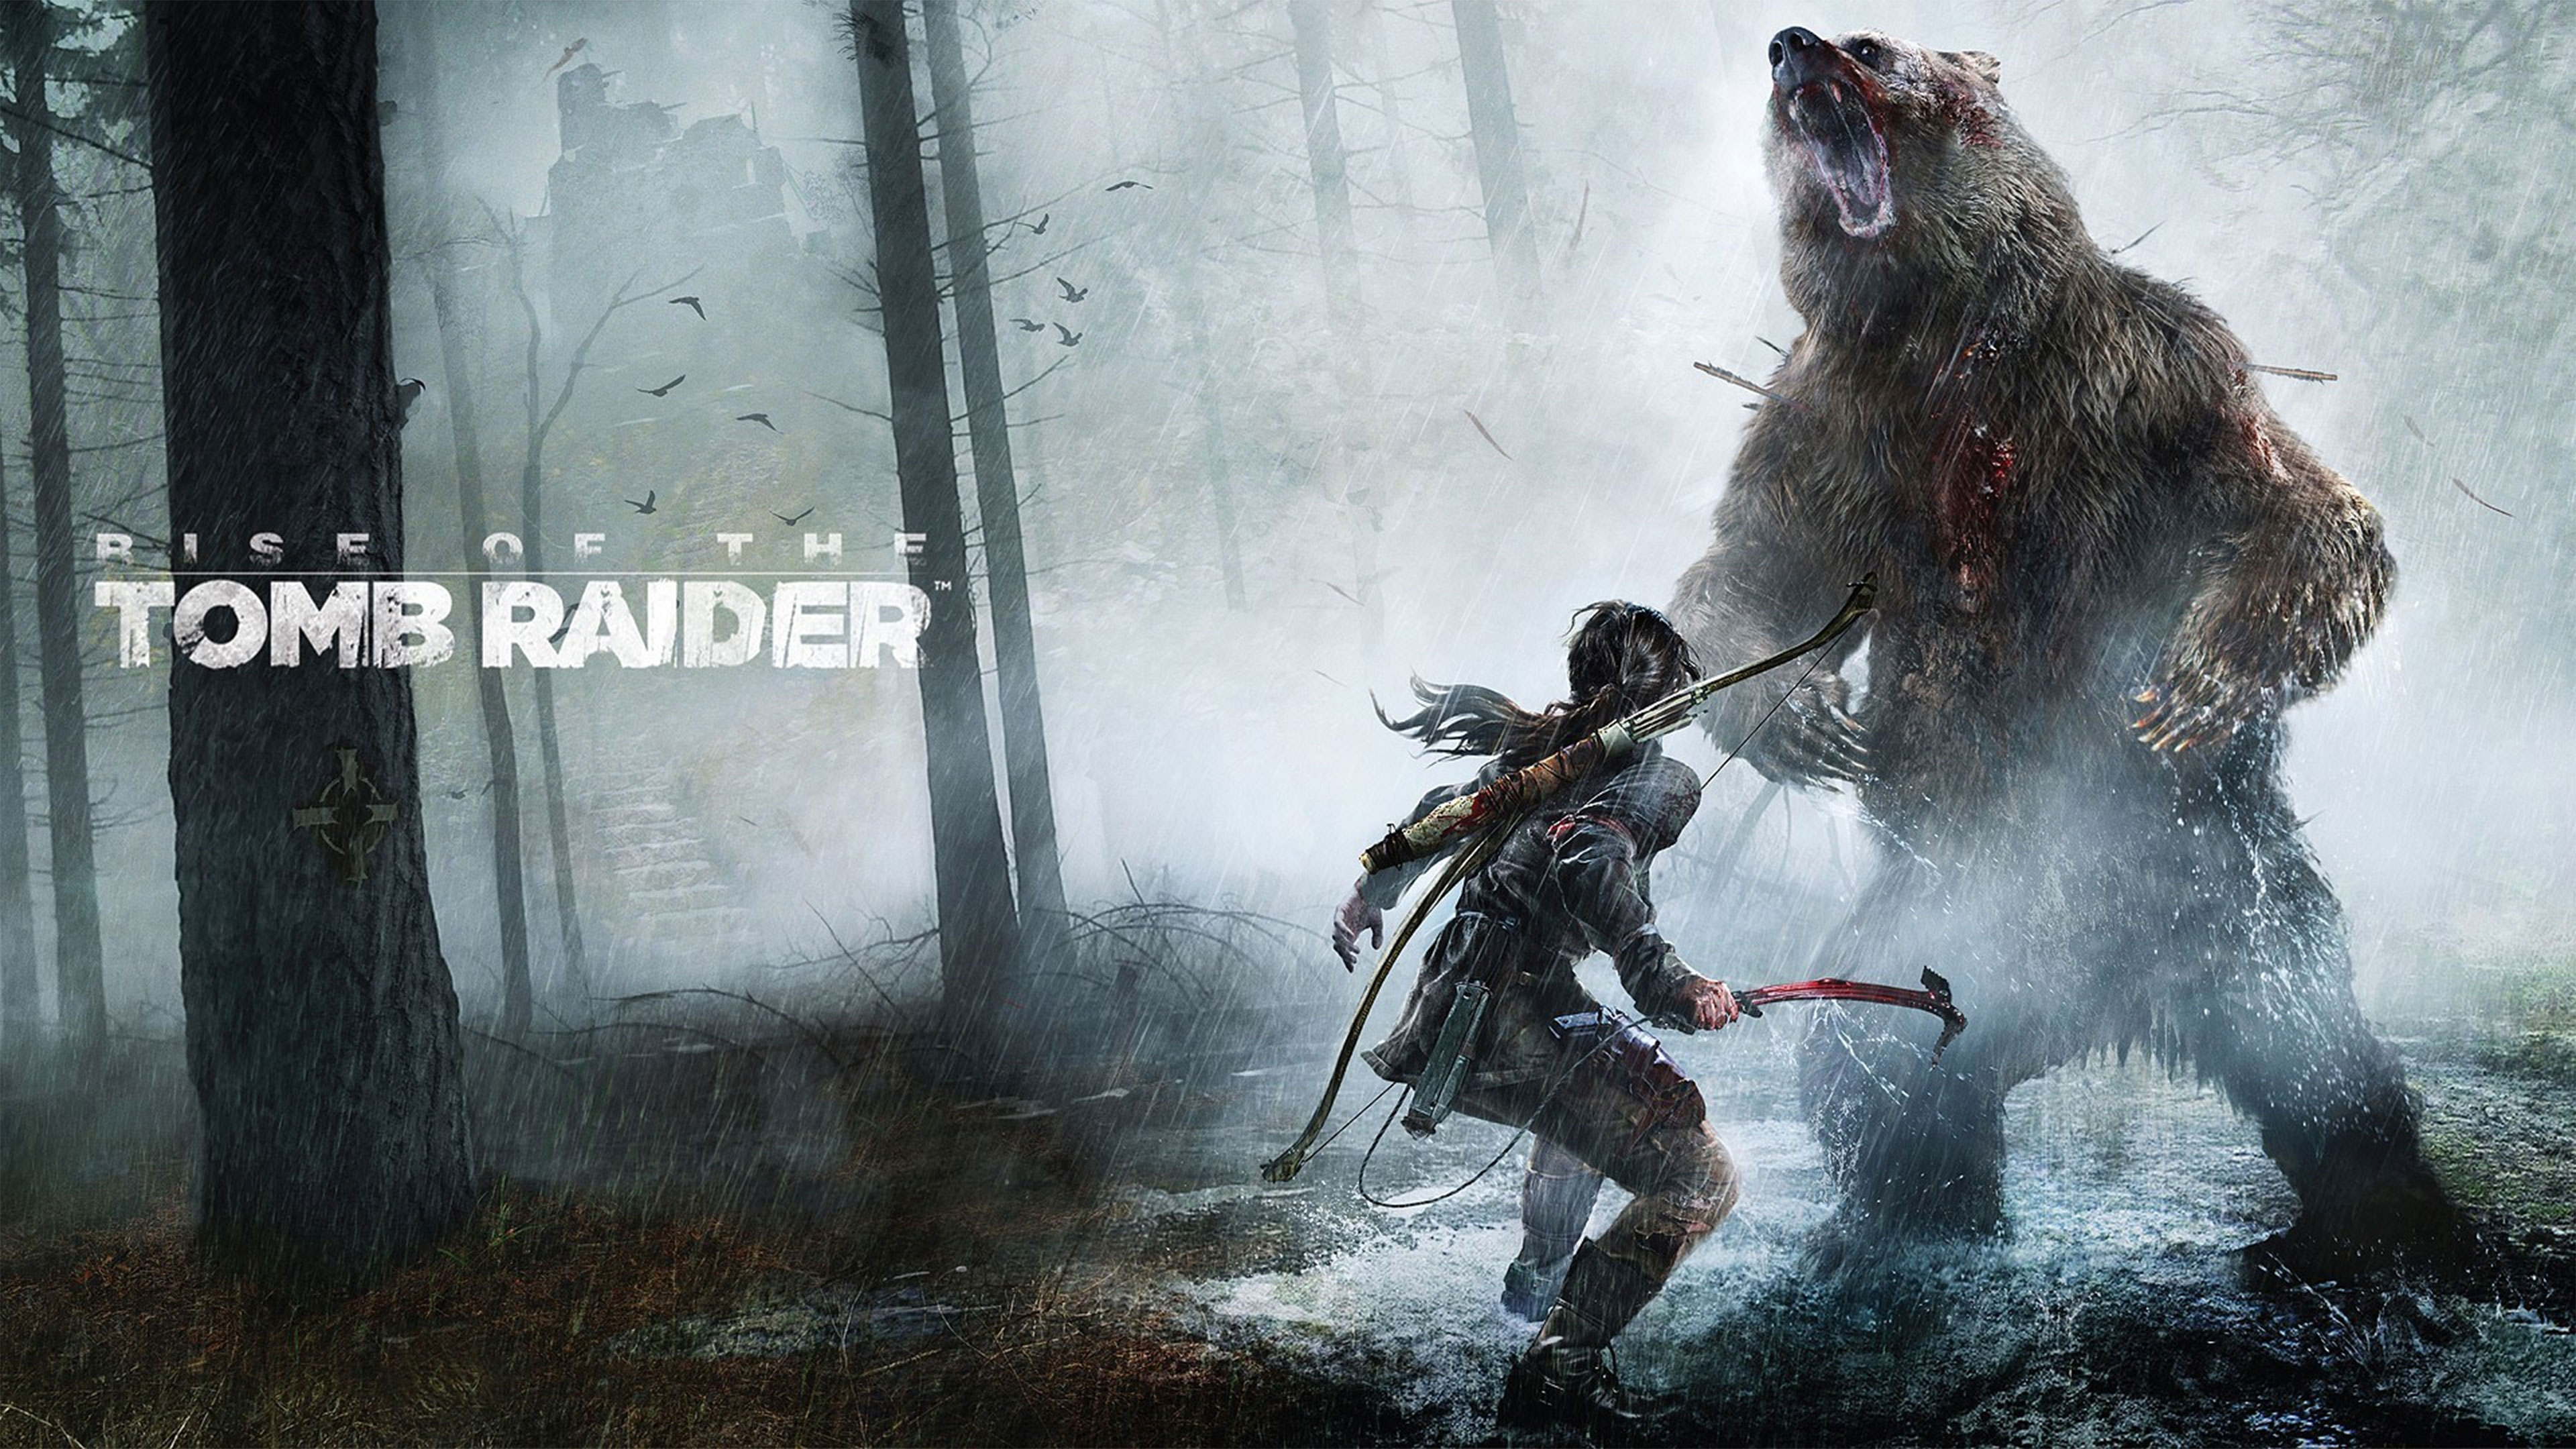 Rise of the Tomb Raider Wallpapers in Ultra HD 4K   Gameranx